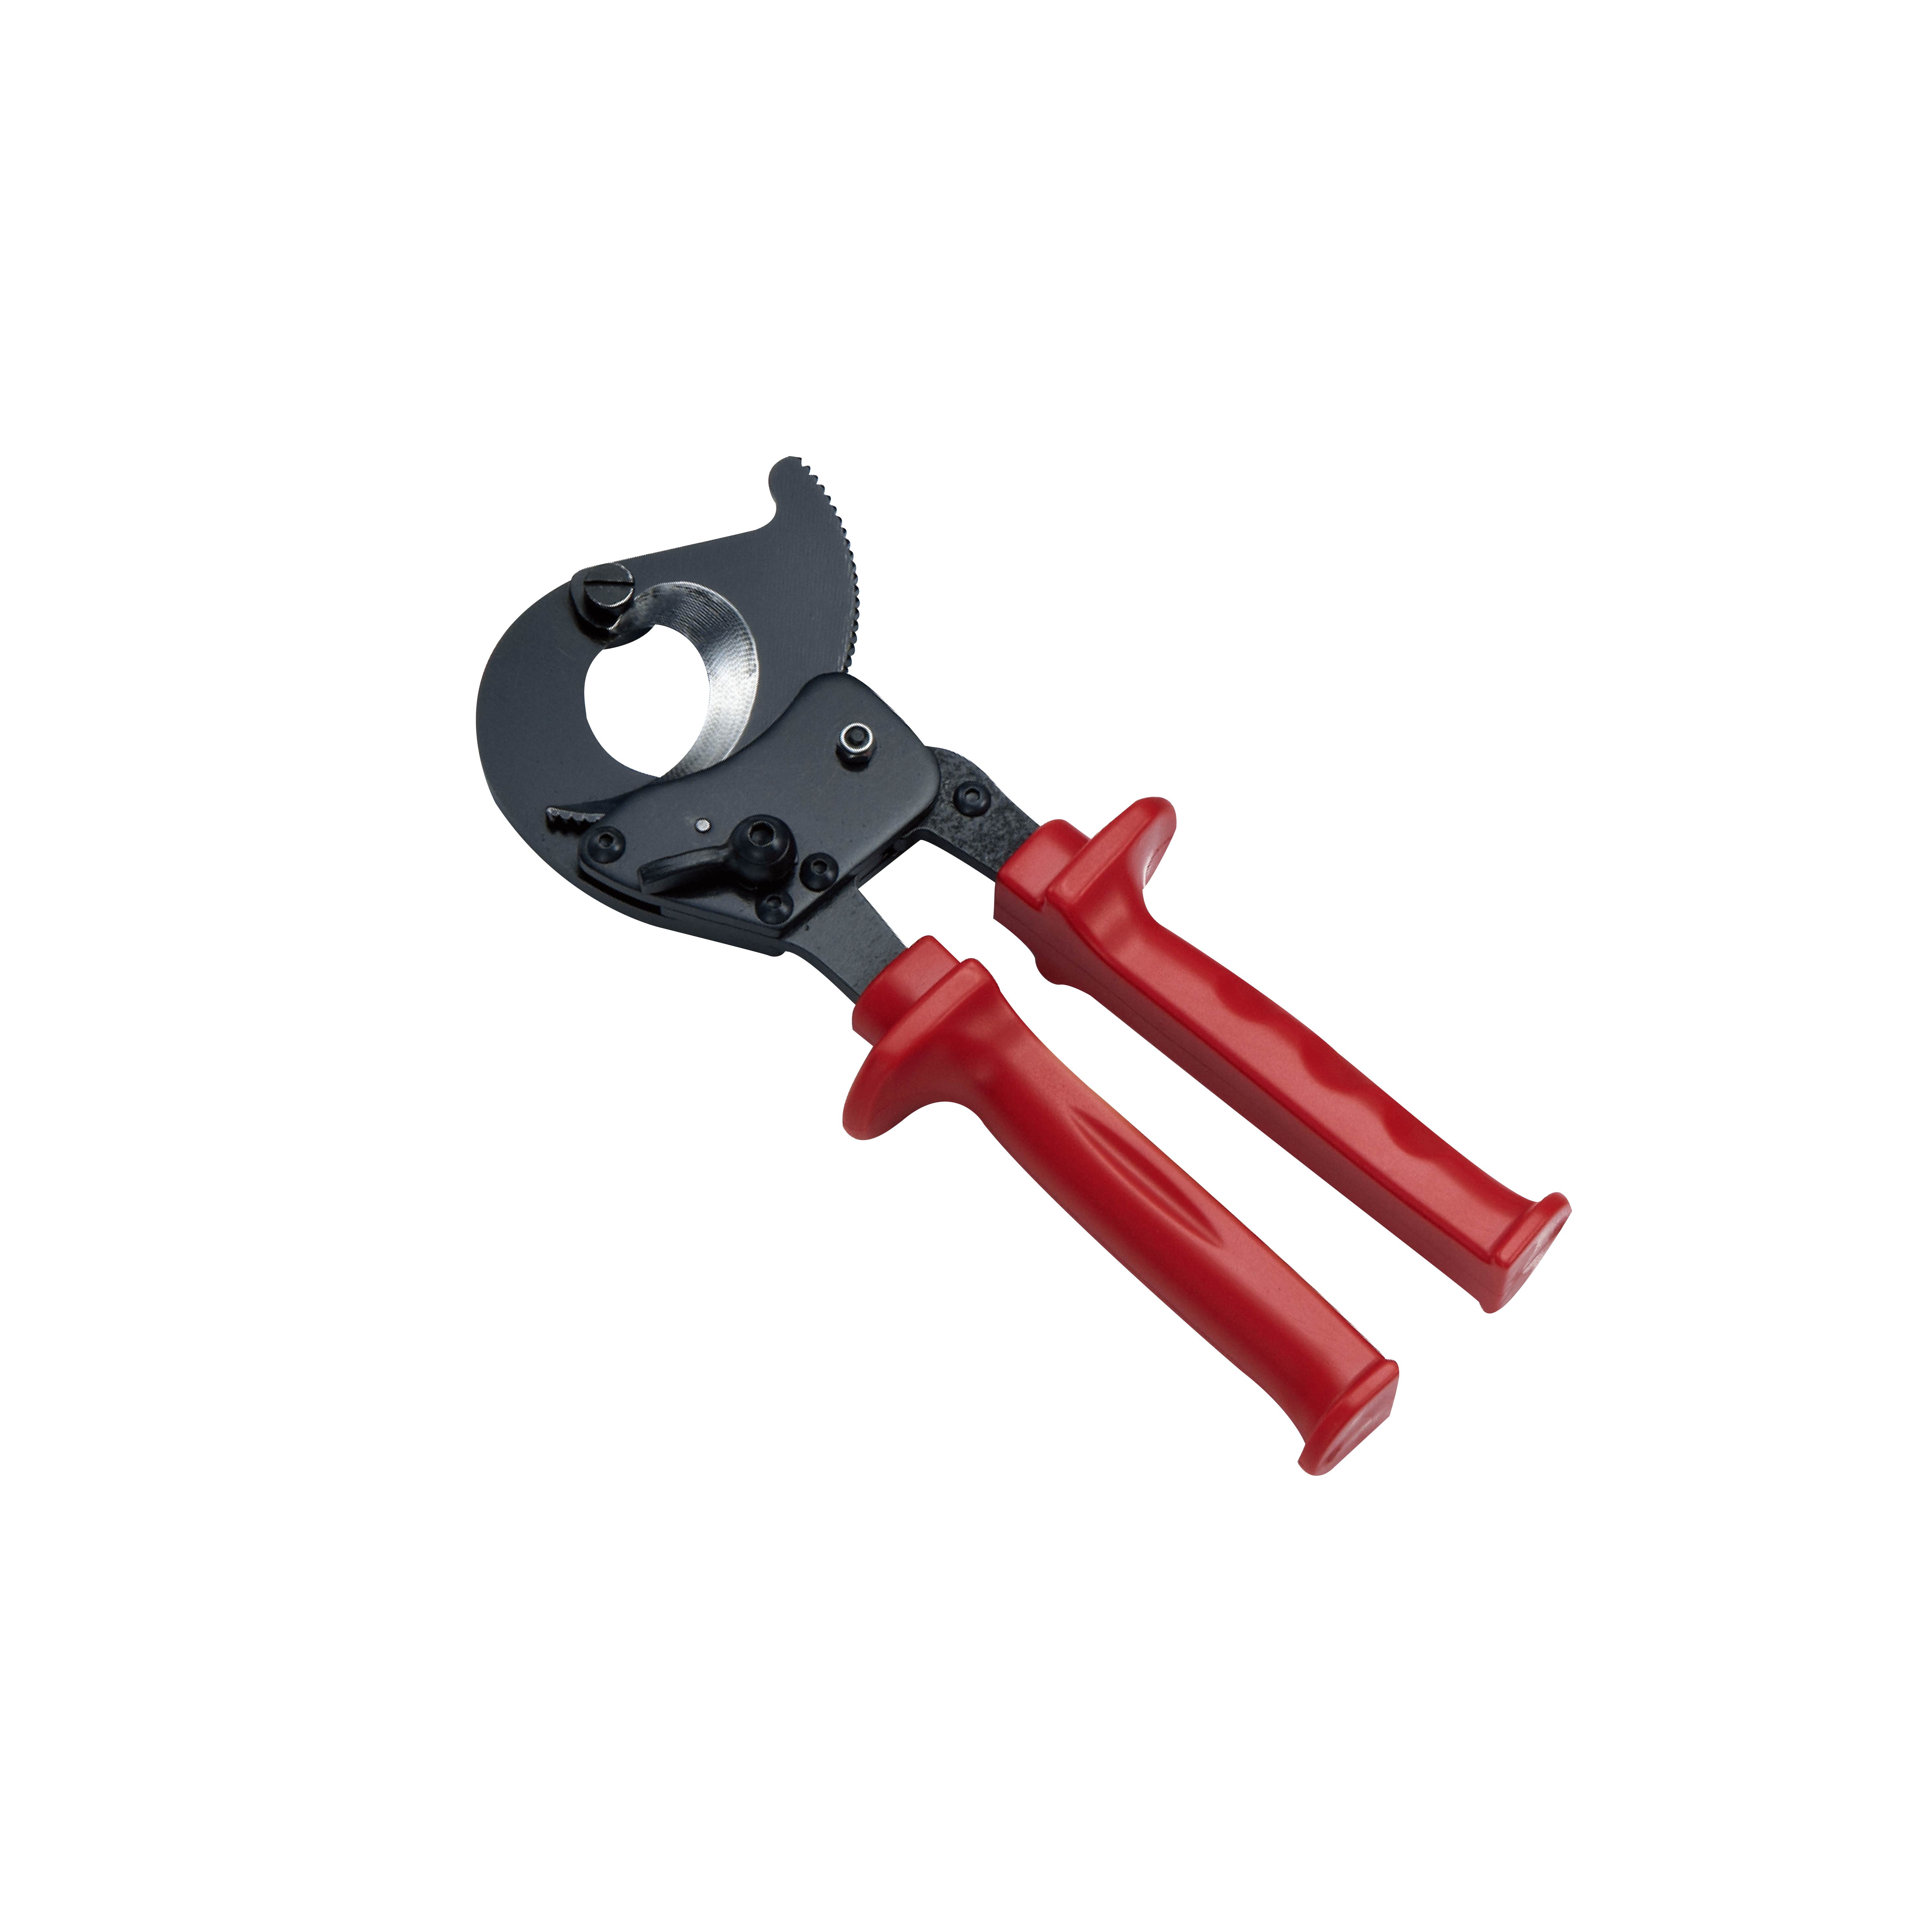 HAND CABLE CUTTERS